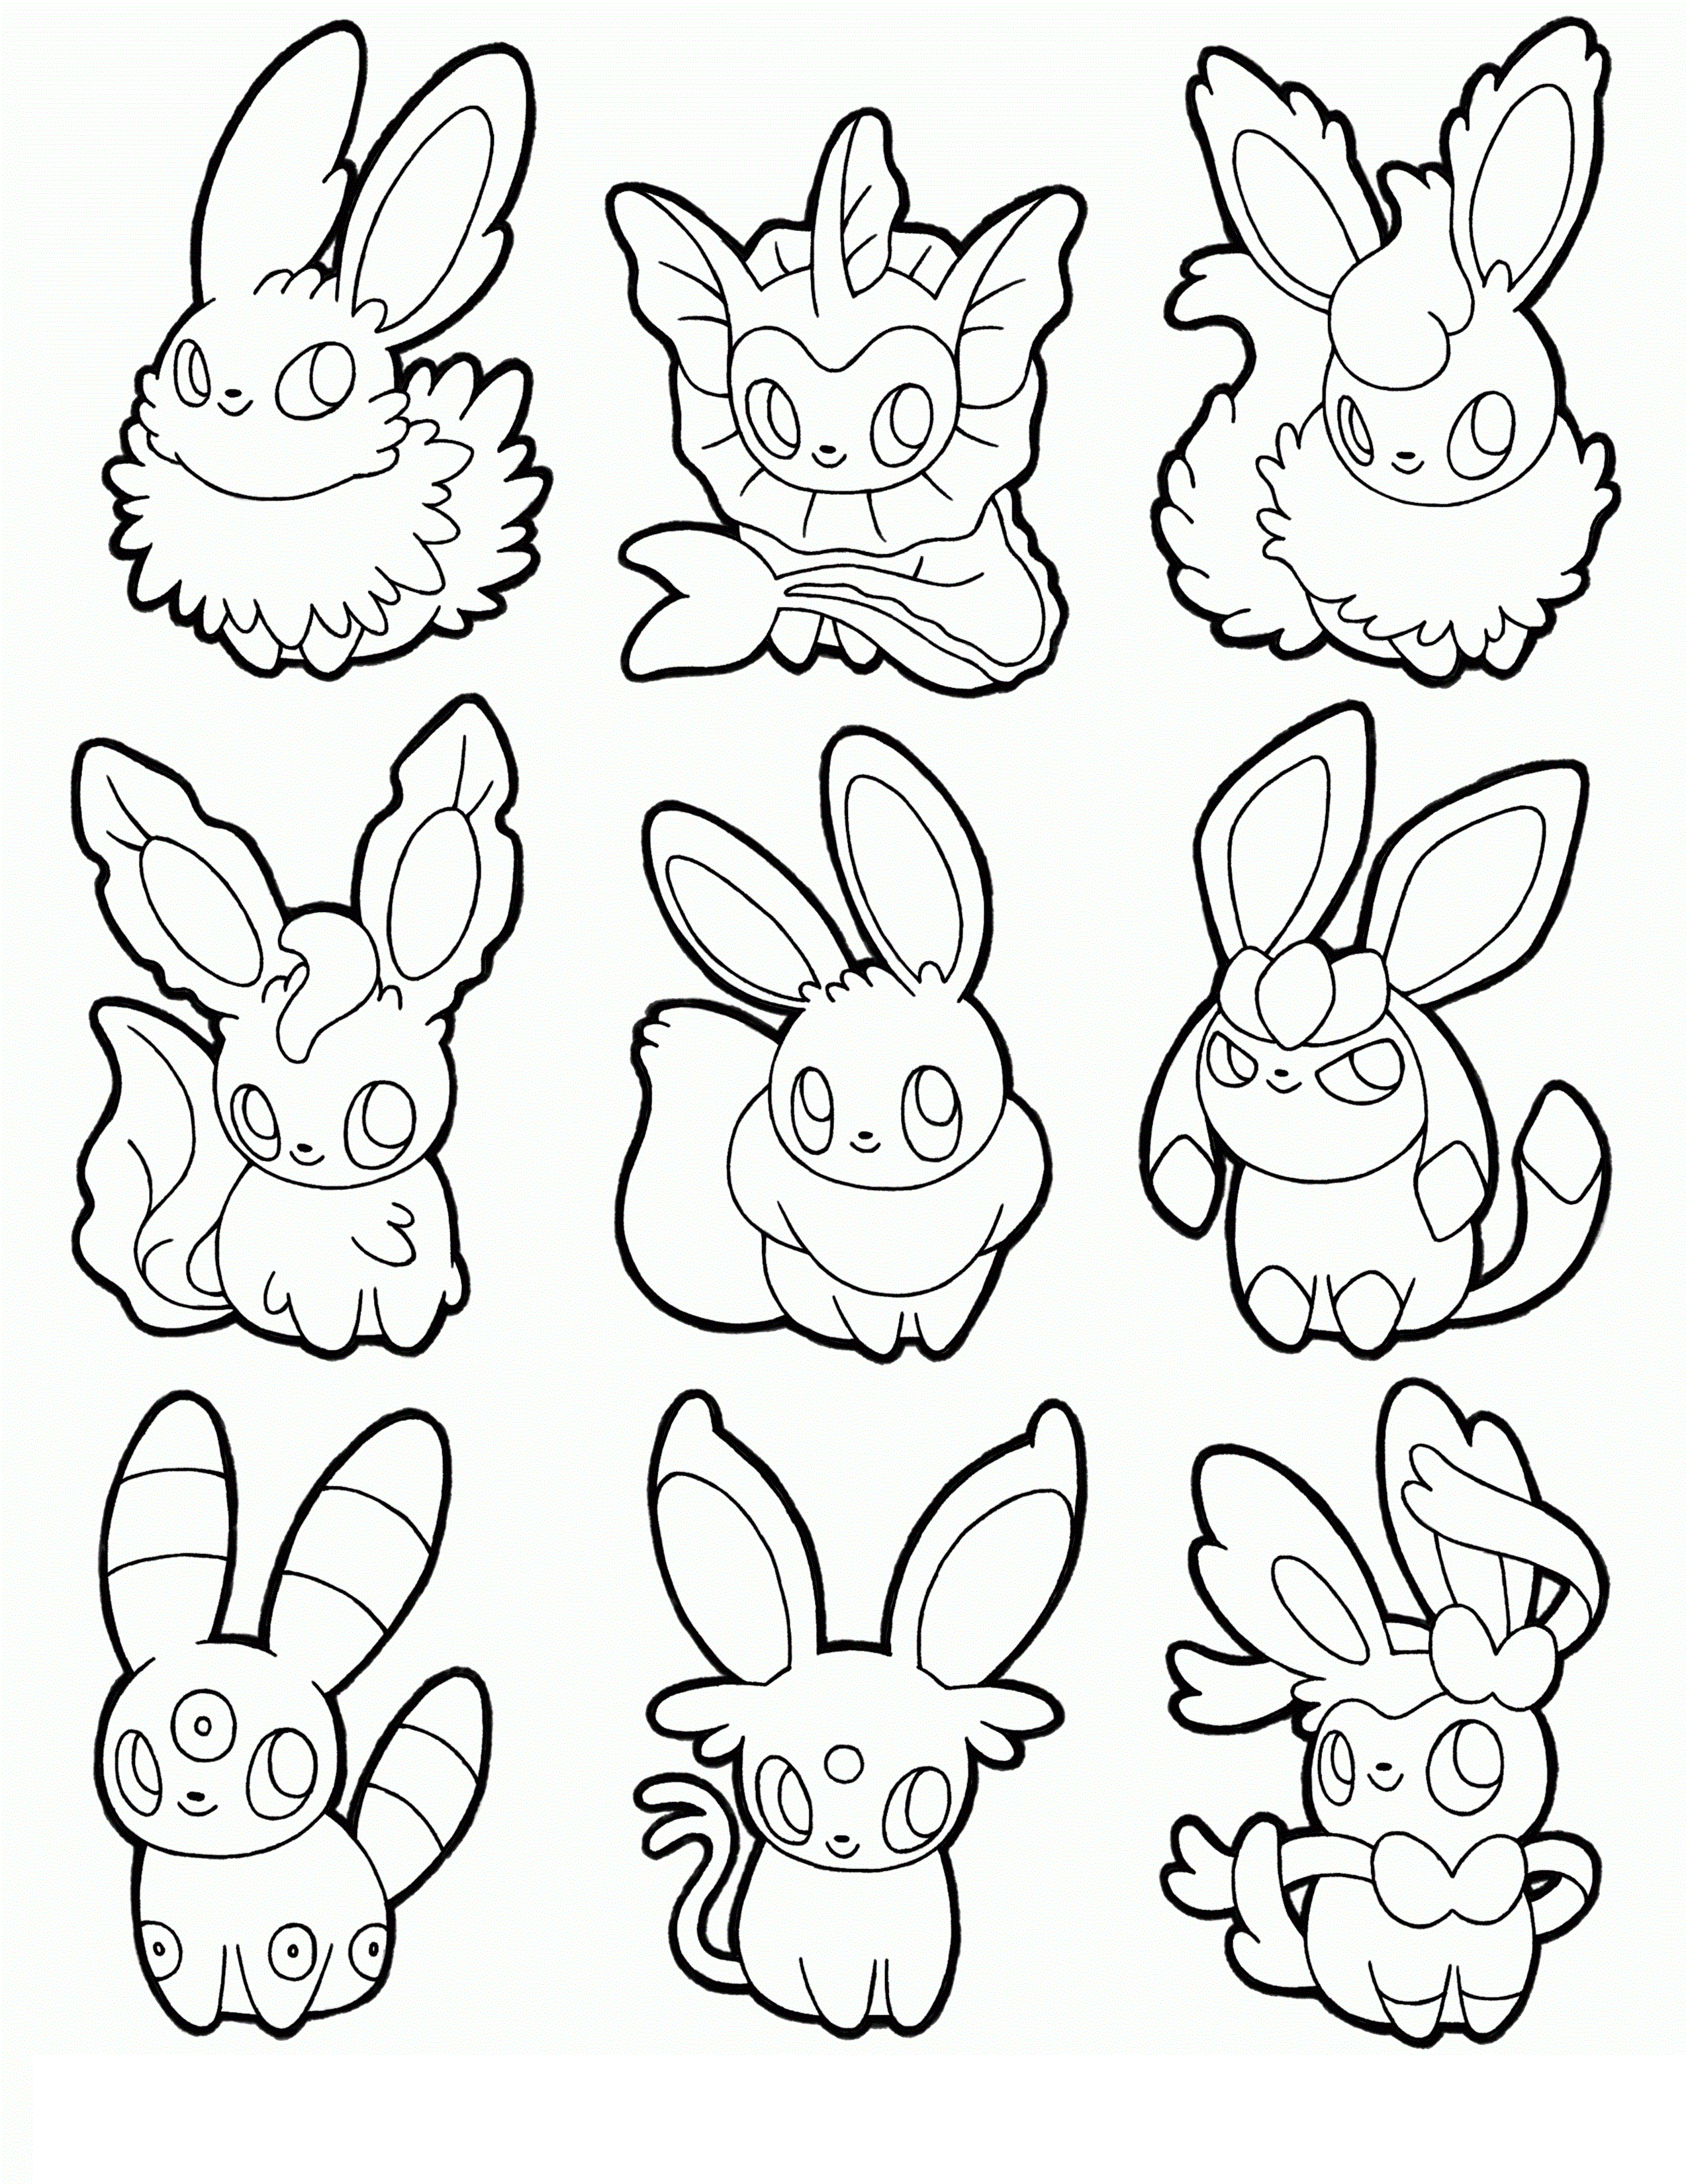 eeveelutions coloring pages one